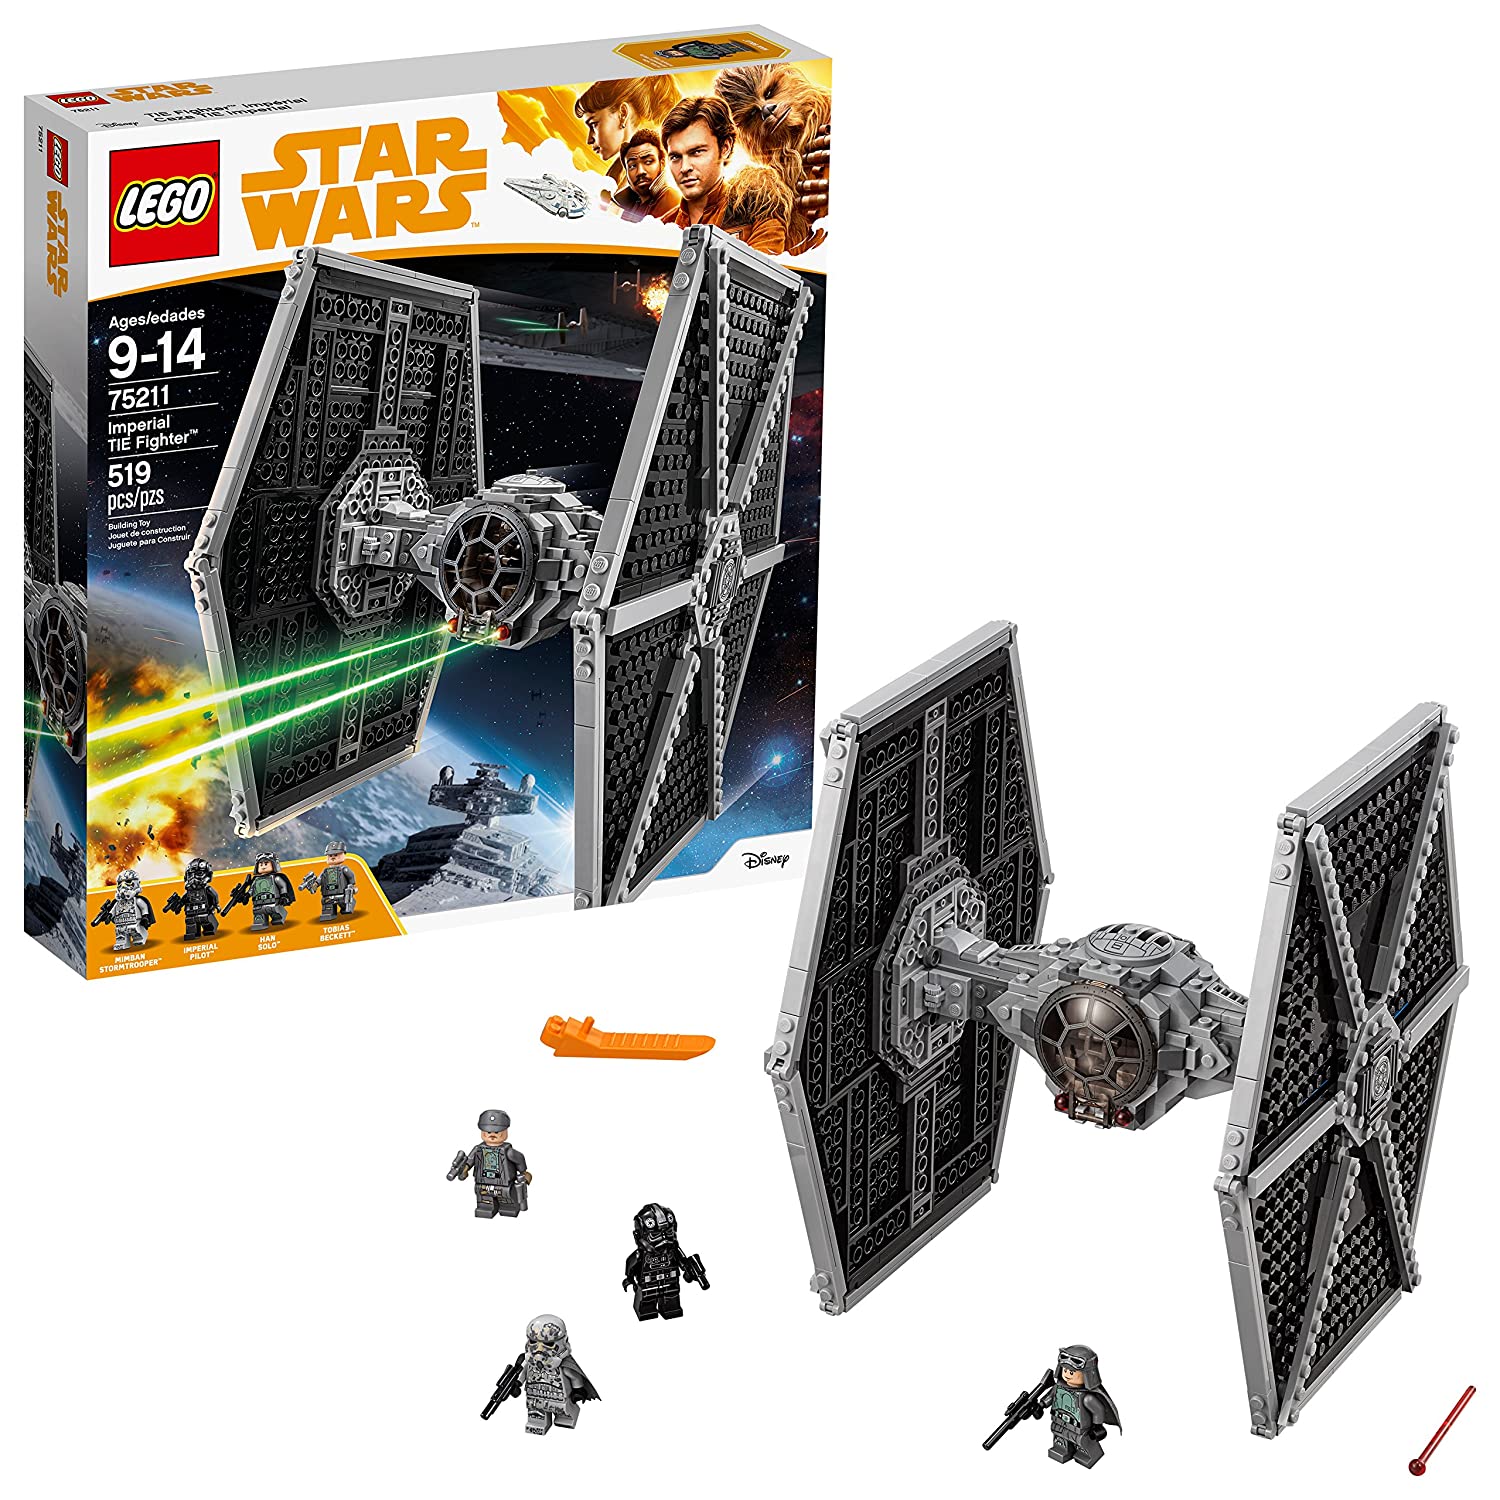 LEGO Star Wars Imperial TIE Fighter 75211 Building Kit